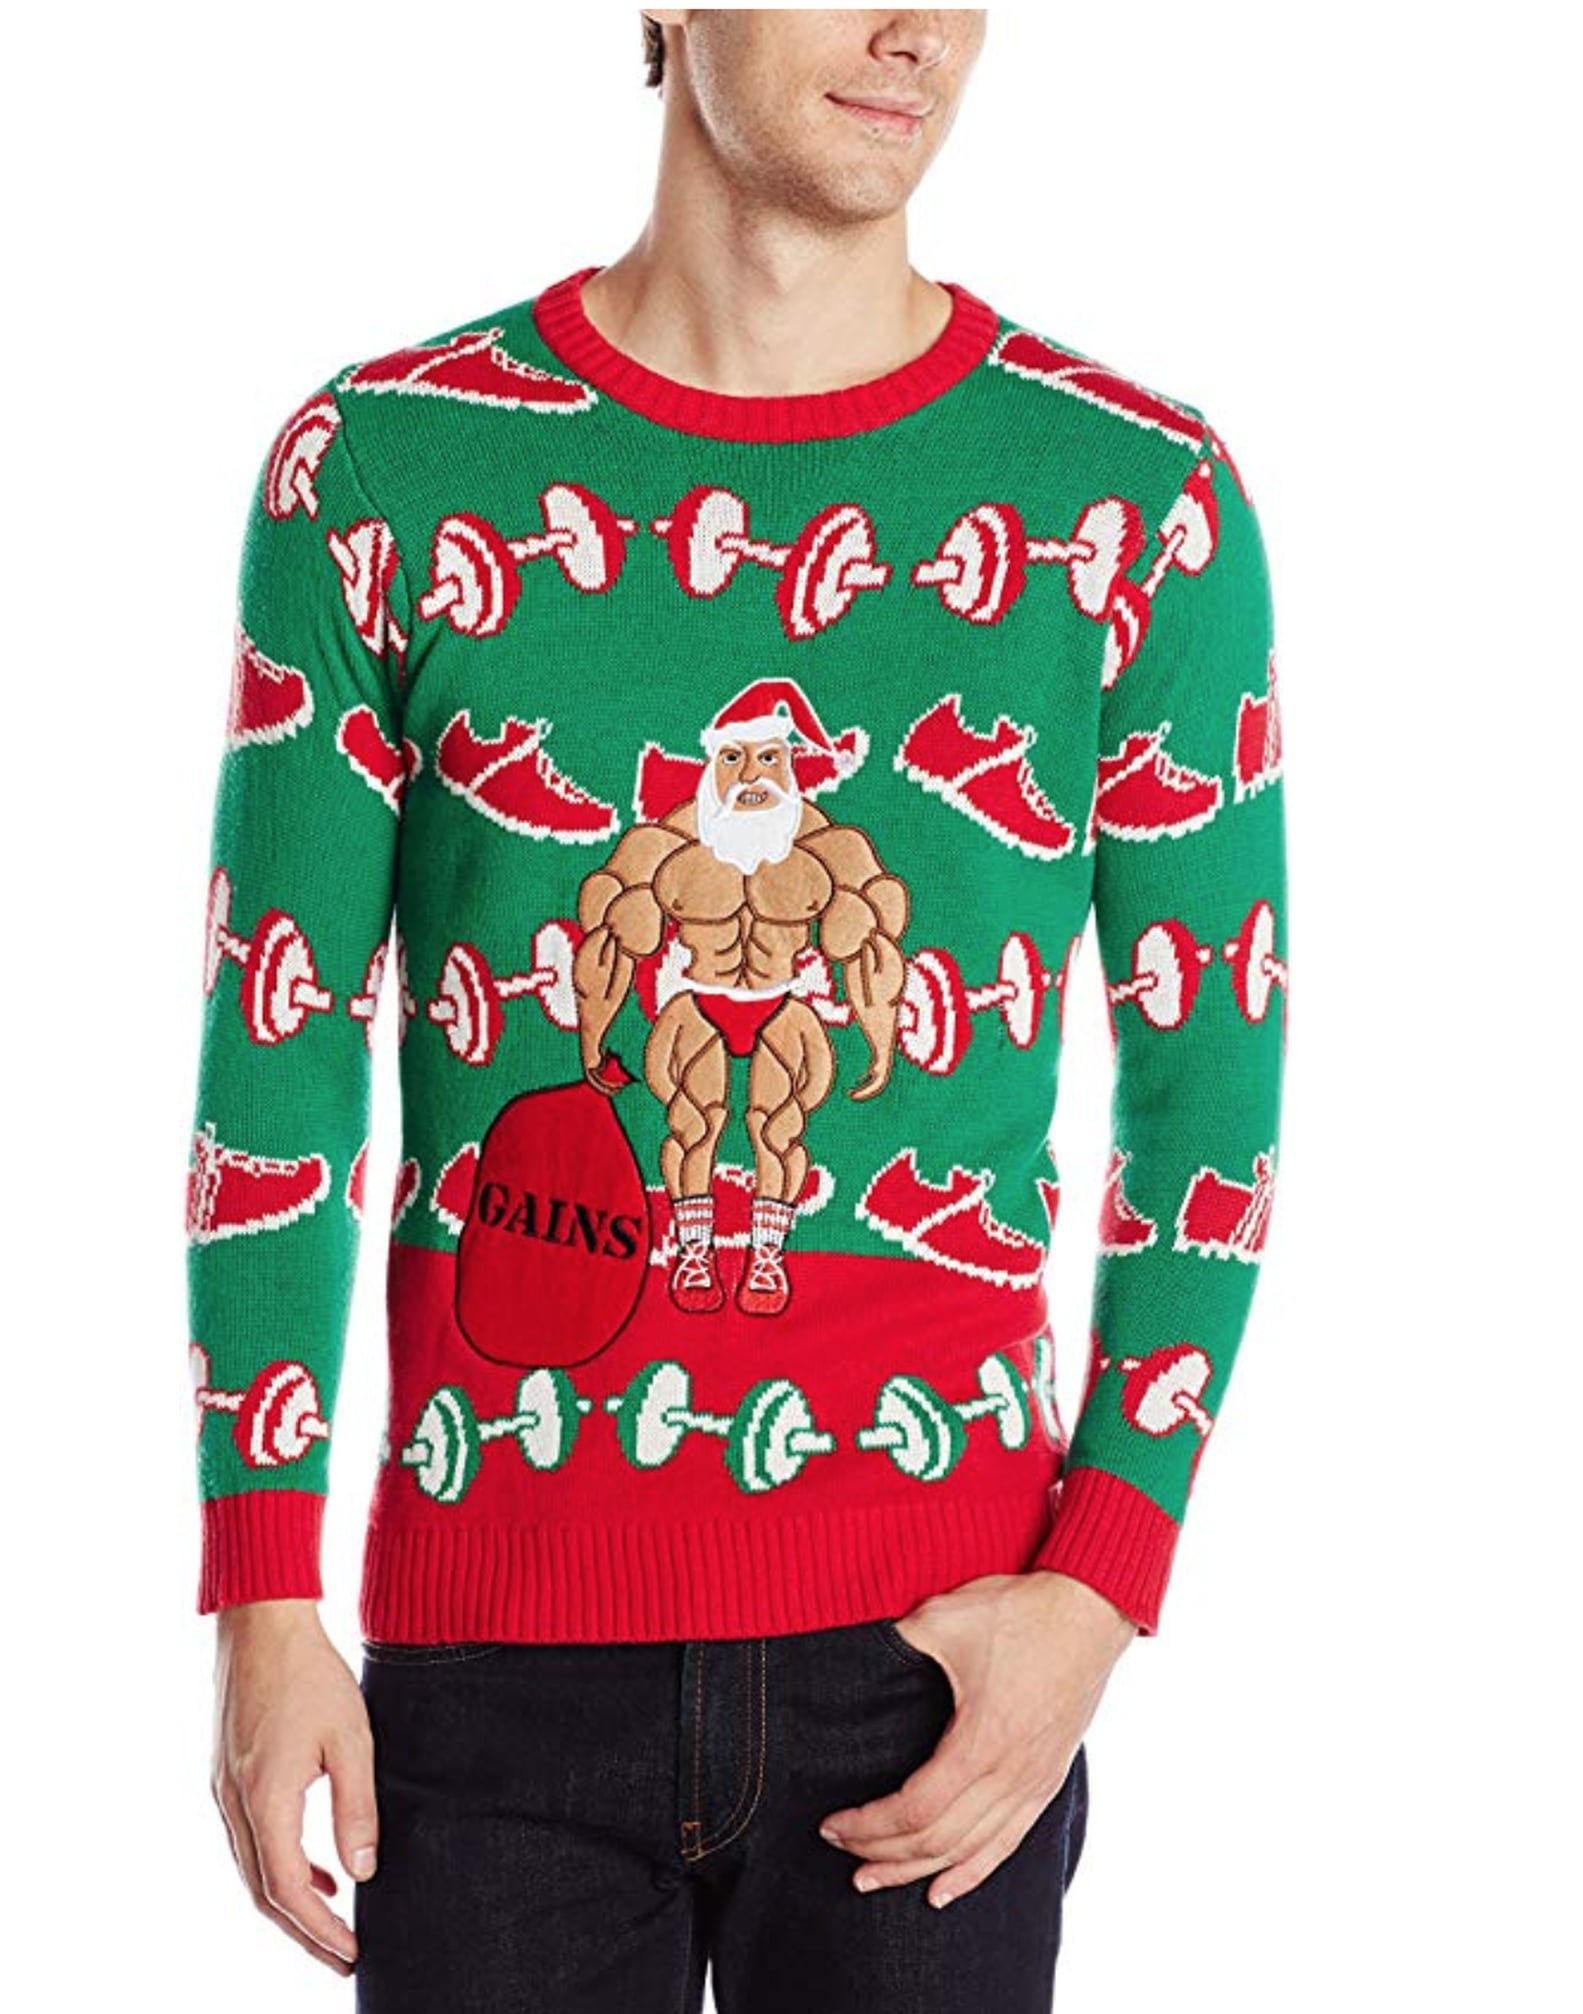 Fitness-Inspired Ugly Sweaters You Can Buy on Amazon | POPSUGAR Fitness